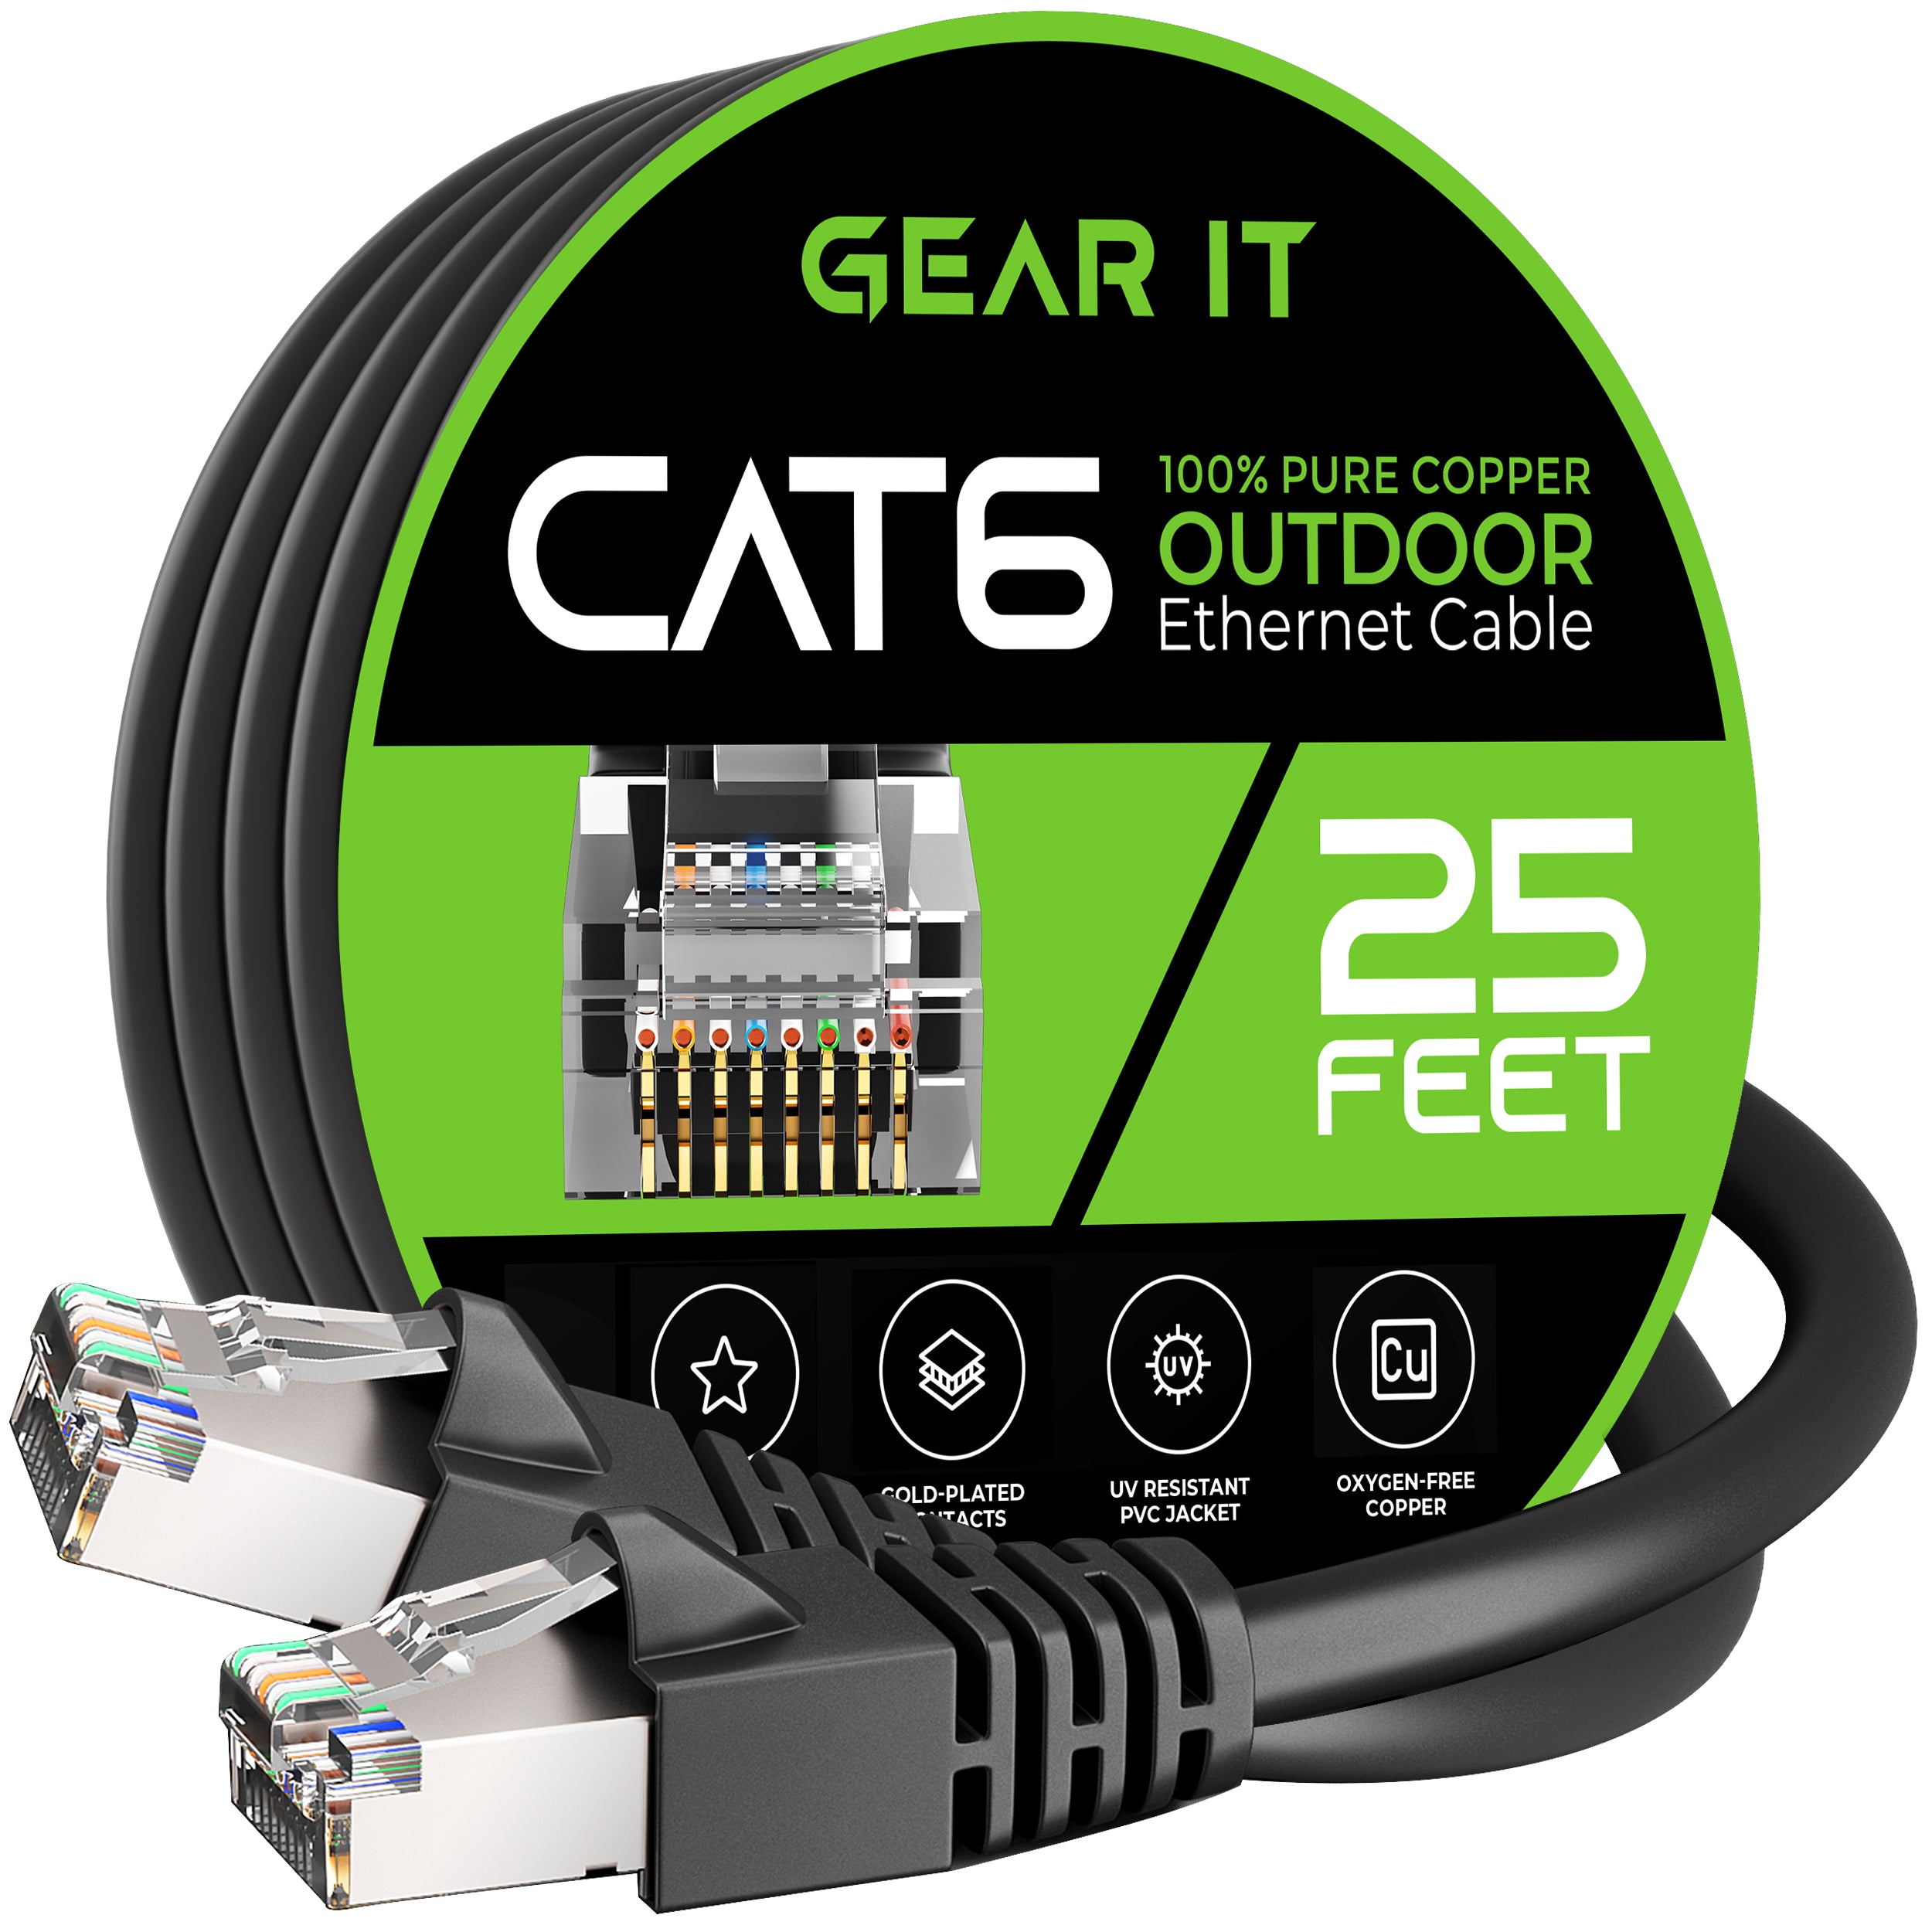 GearIT Cat6 Outdoor Ethernet Cable - 23AWG LLDPE Weatherproof Jacket S